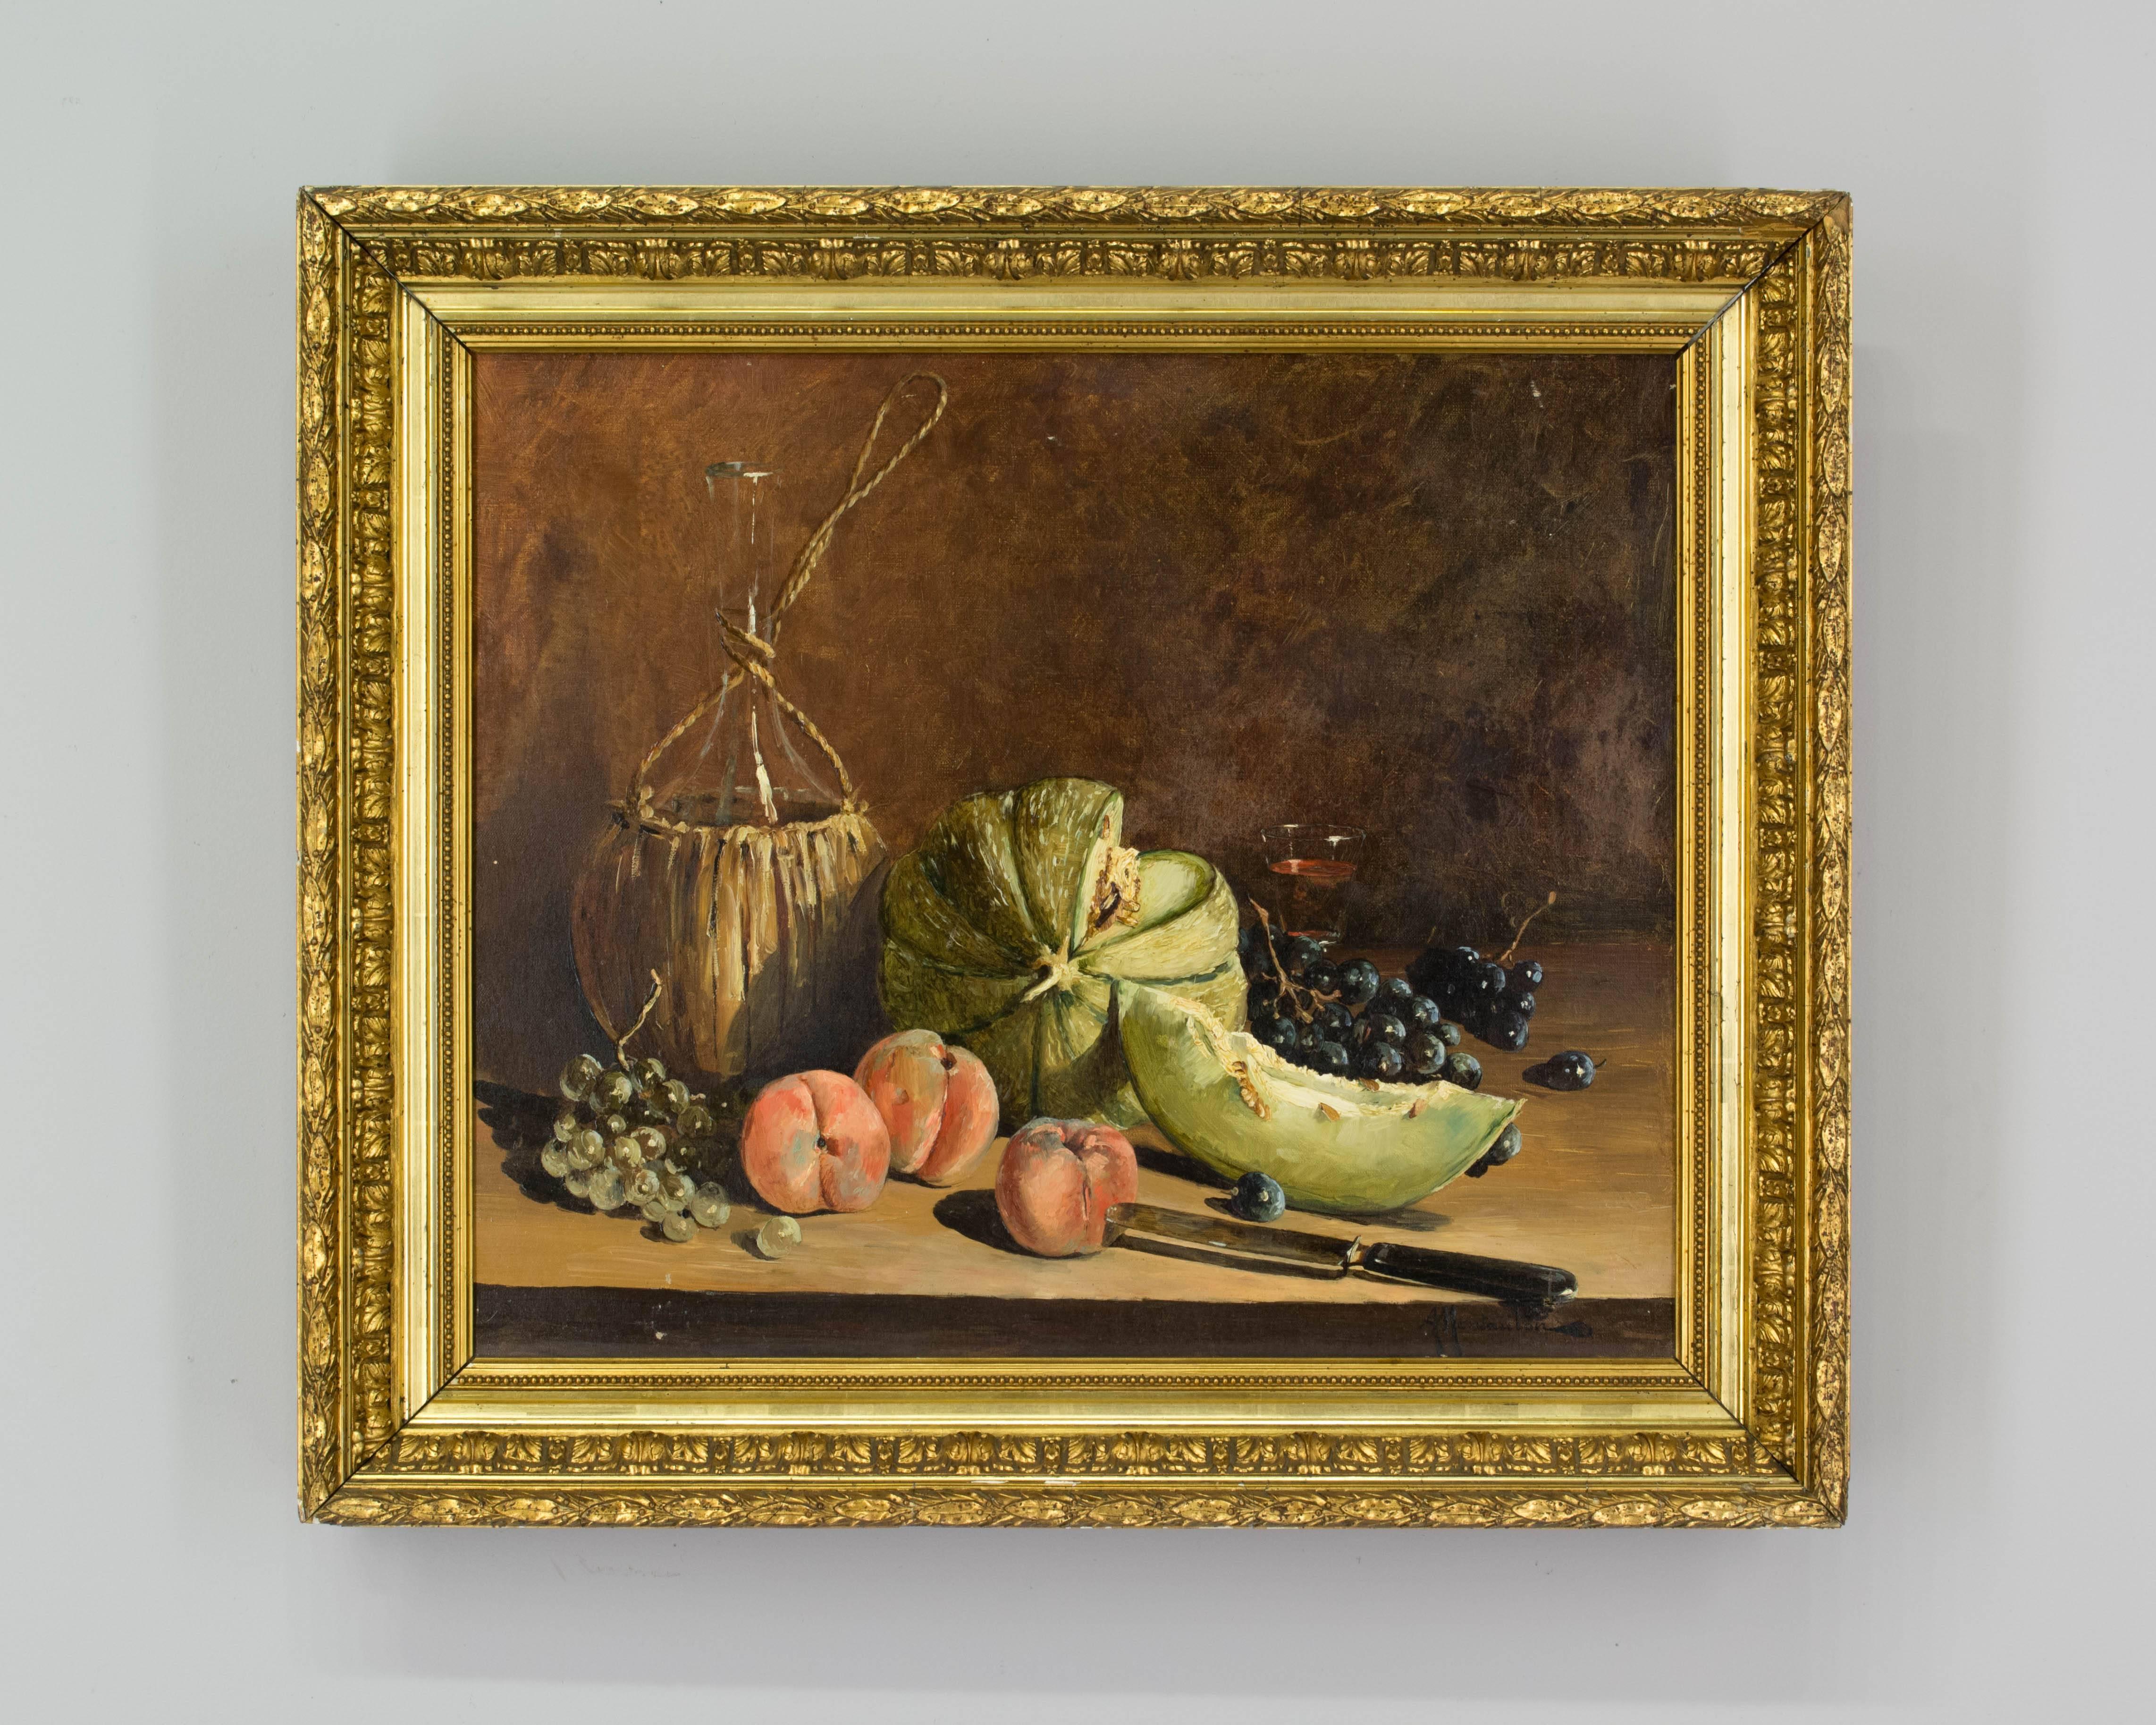 An early 20th century French still life painting by Alexandre Montaulon entitled Le Melon. Signed lower right. Oil on canvas. Gold leaf frame.